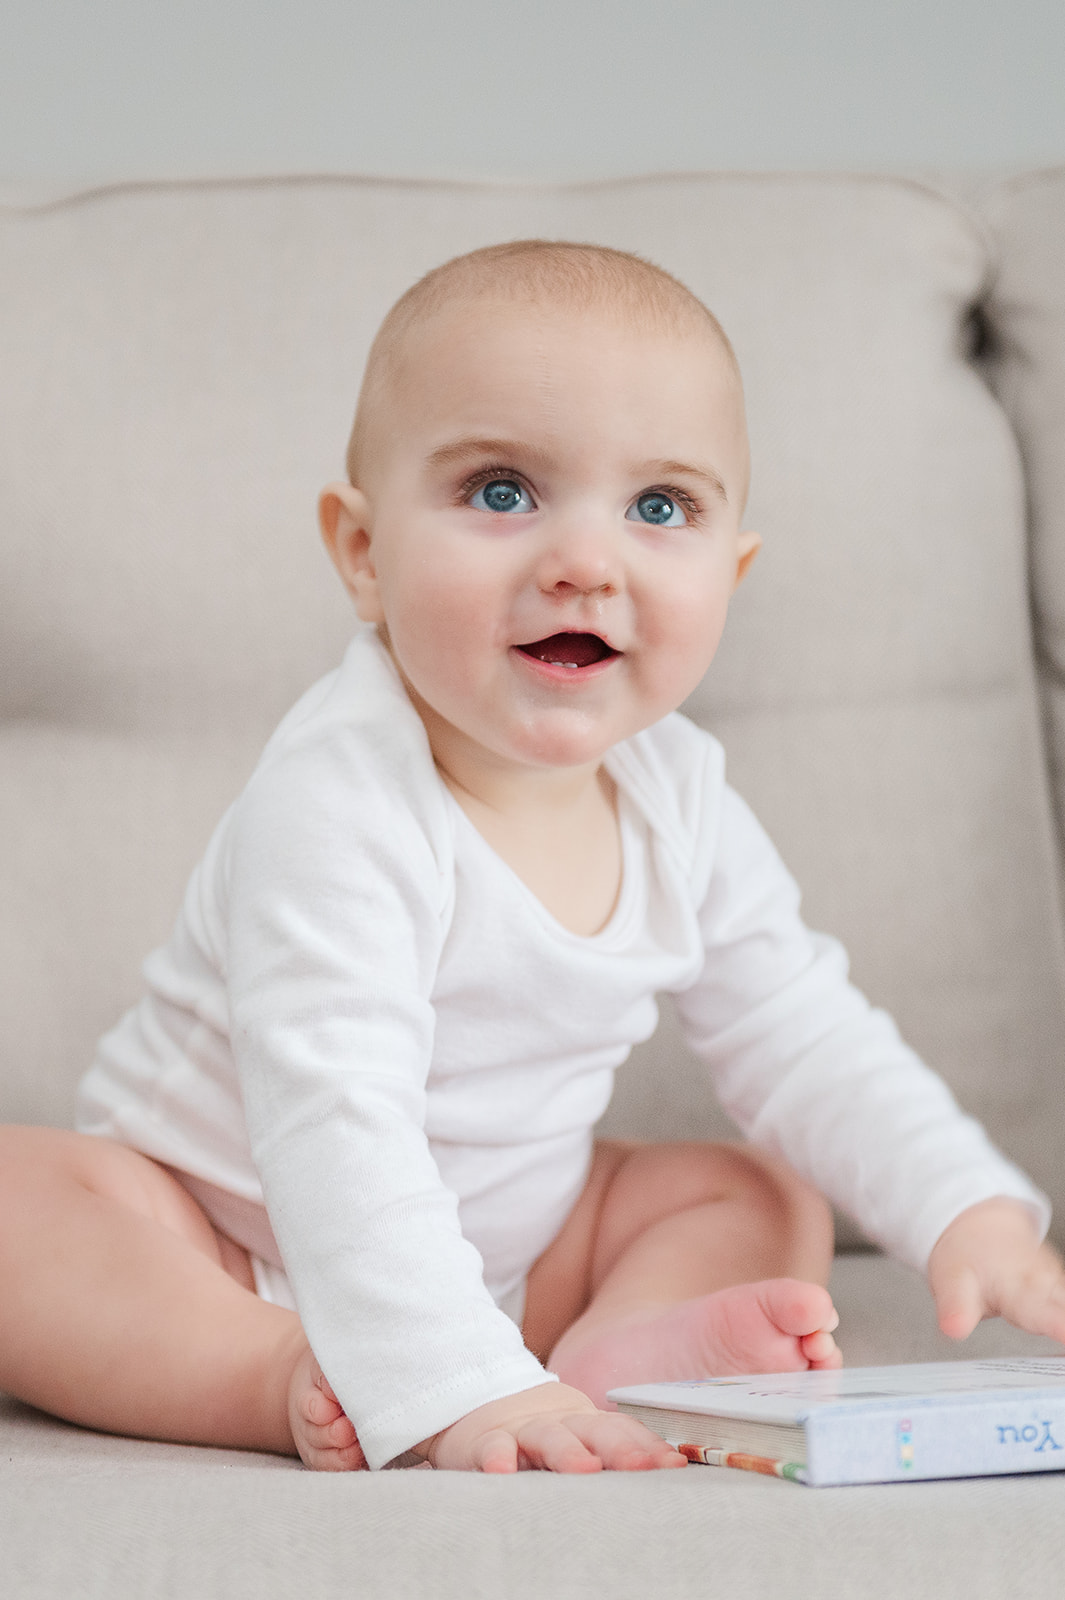 9 month old sitting on the couch with a sweet smile and big blue eyes